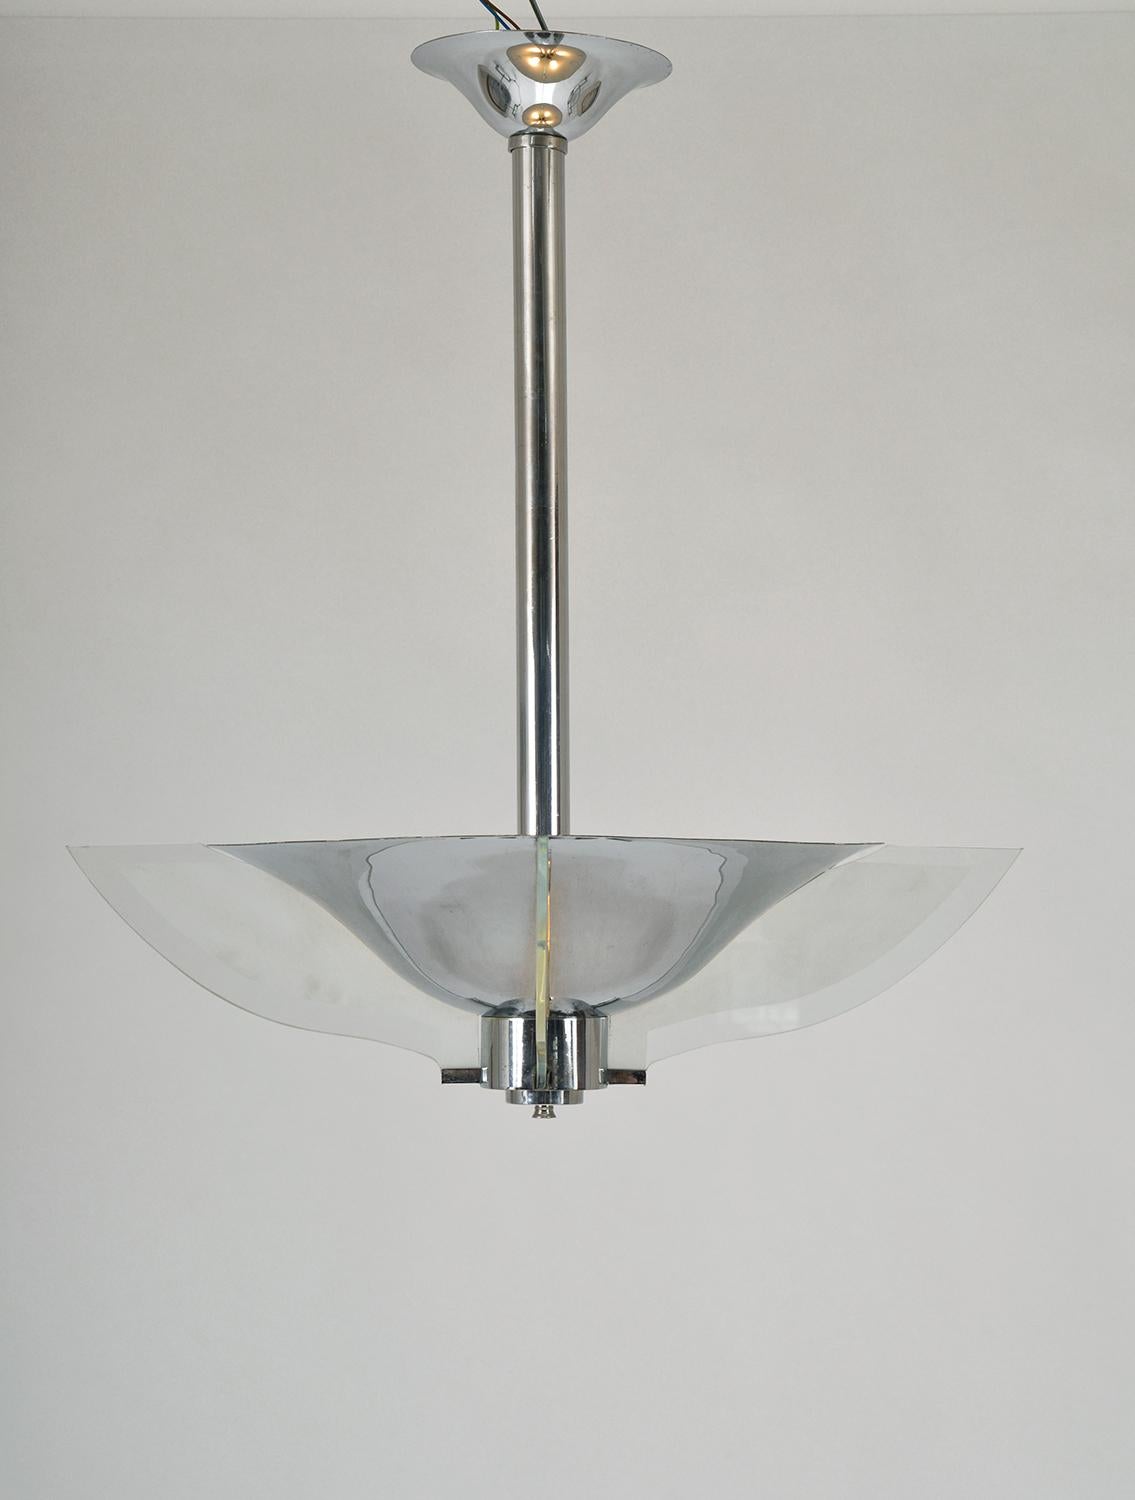 This chrome and glass ceiling pendant light is a stunning example of French Art Deco by Petito. Hanging from a chrome ceiling rose and rod, the chrome shade is fitted with thick frosted glass ‘petals’, which slot into the shade. The thick chrome is